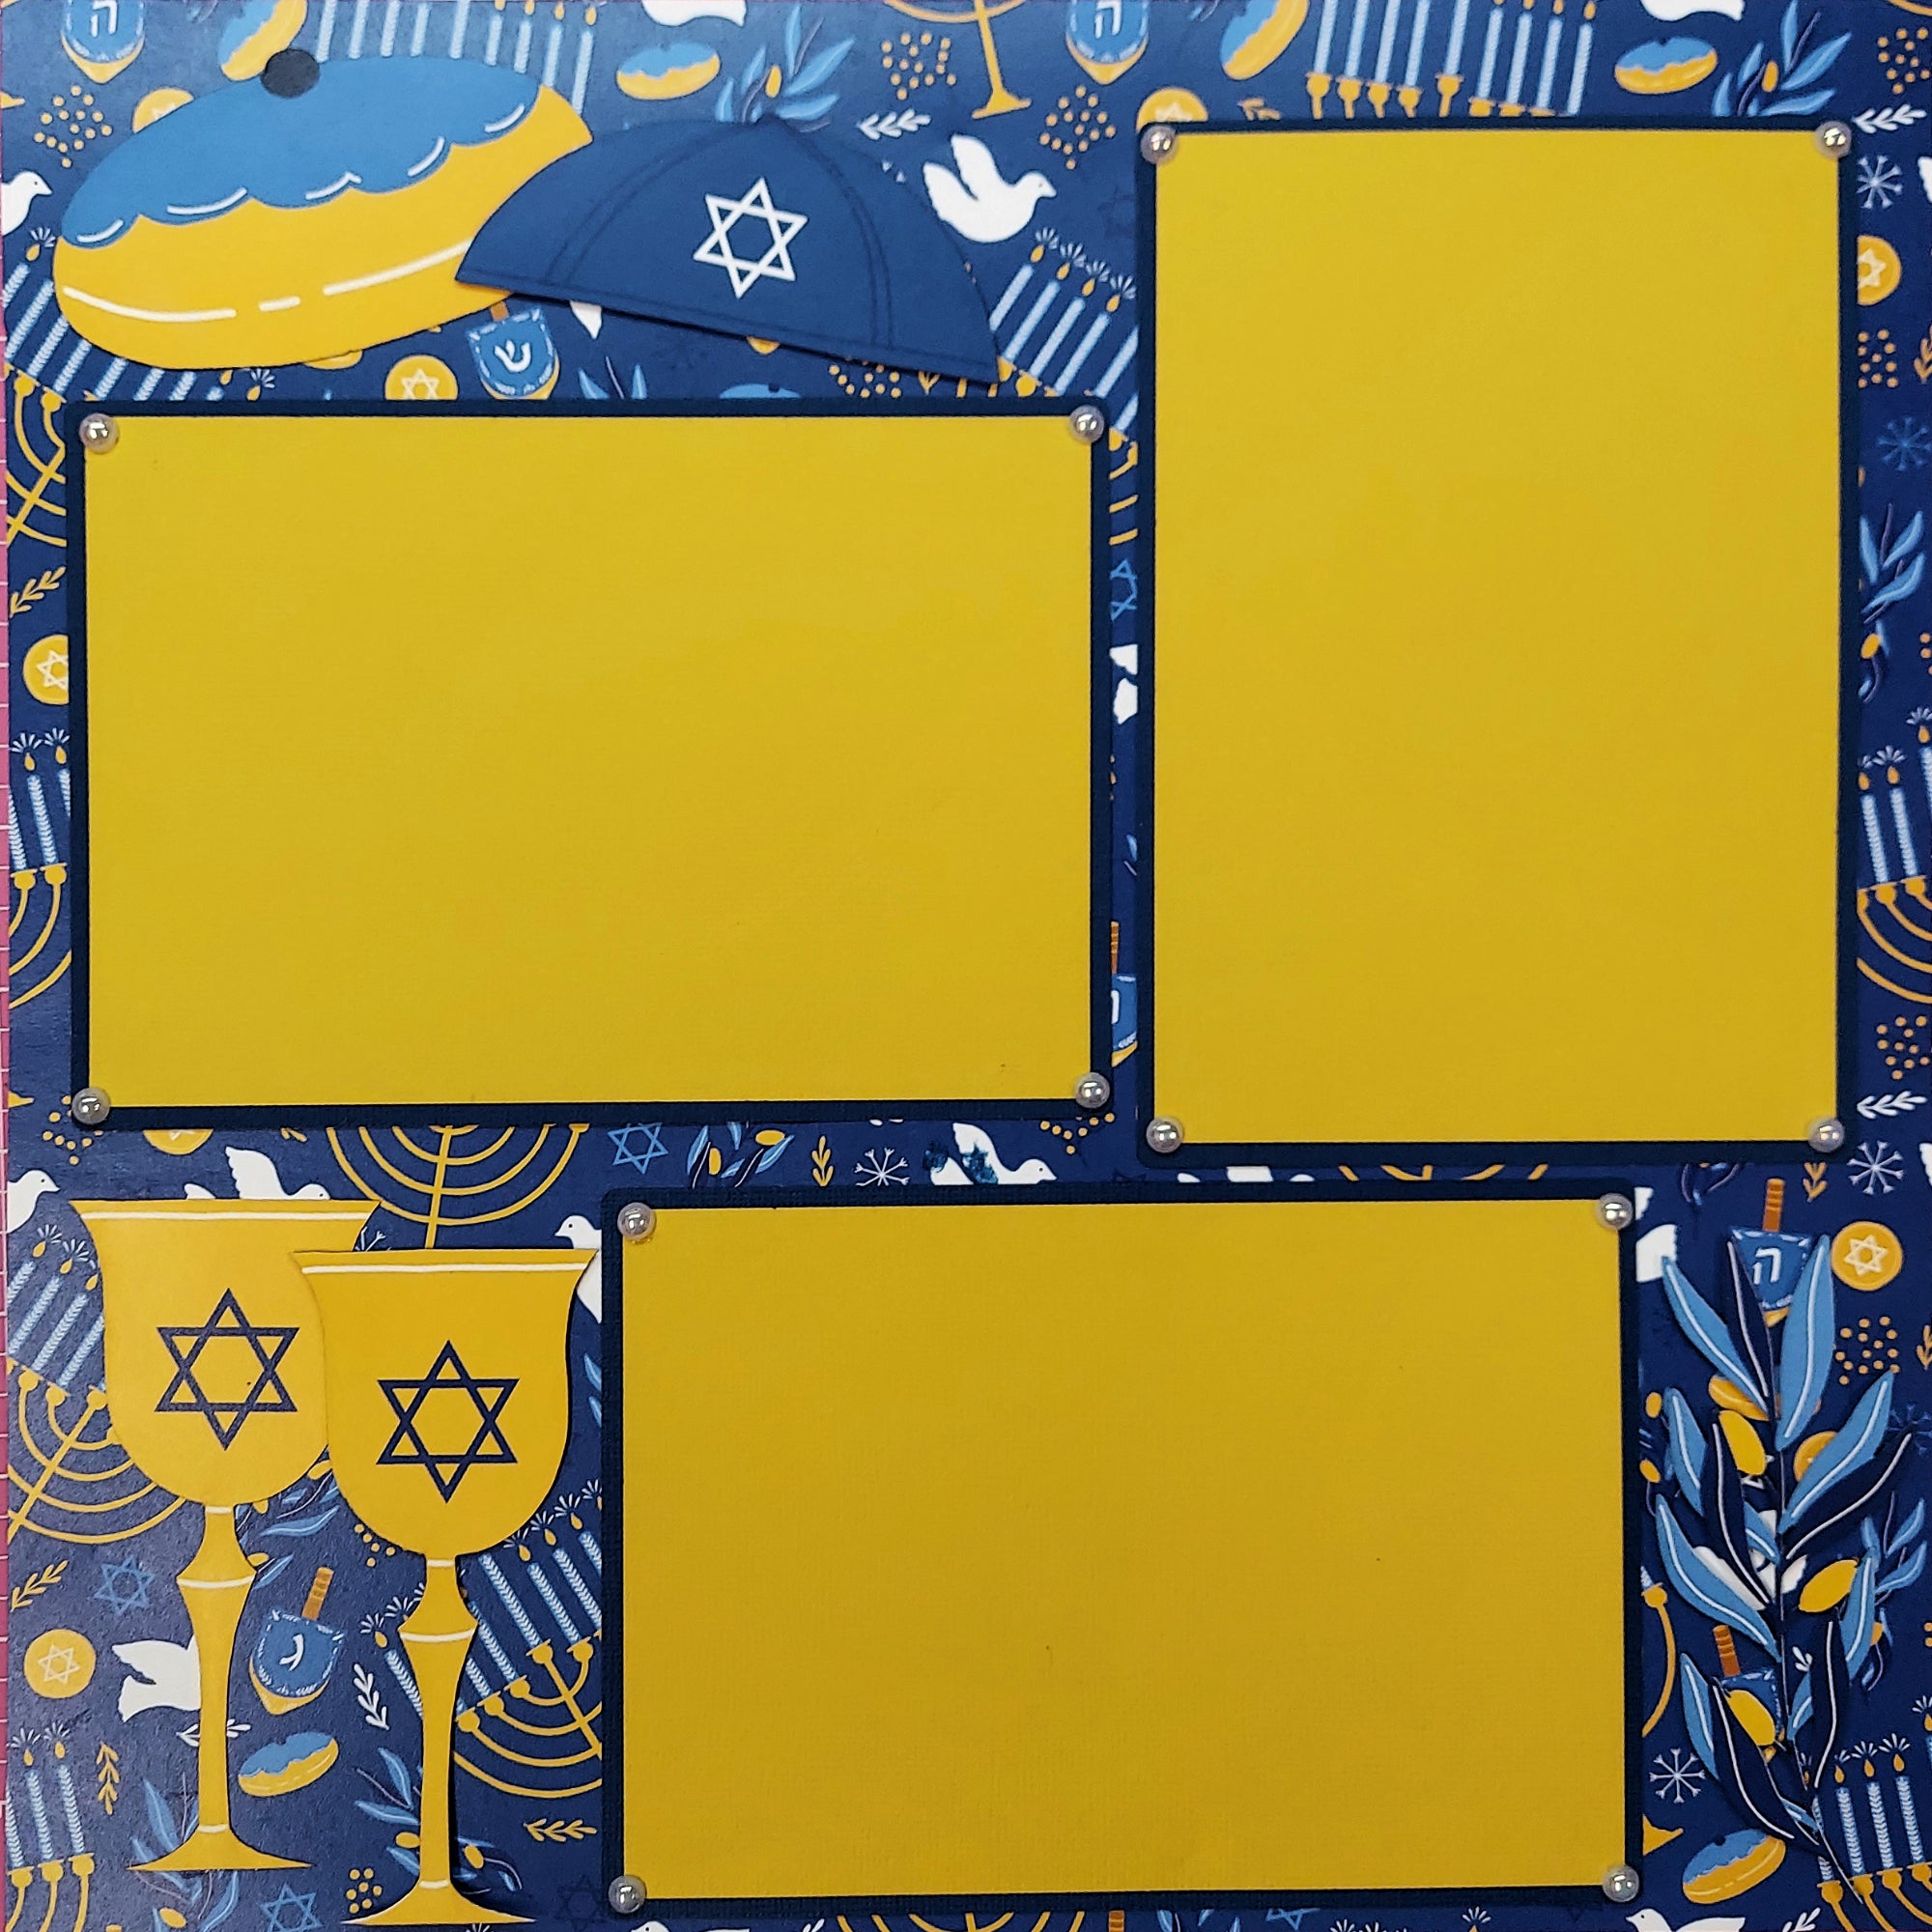 Festival of Lights Hanukkah (2) - 12 x 12 Pages, Fully-Assembled & Hand-Crafted 3D Scrapbook Premade by SSC Designs